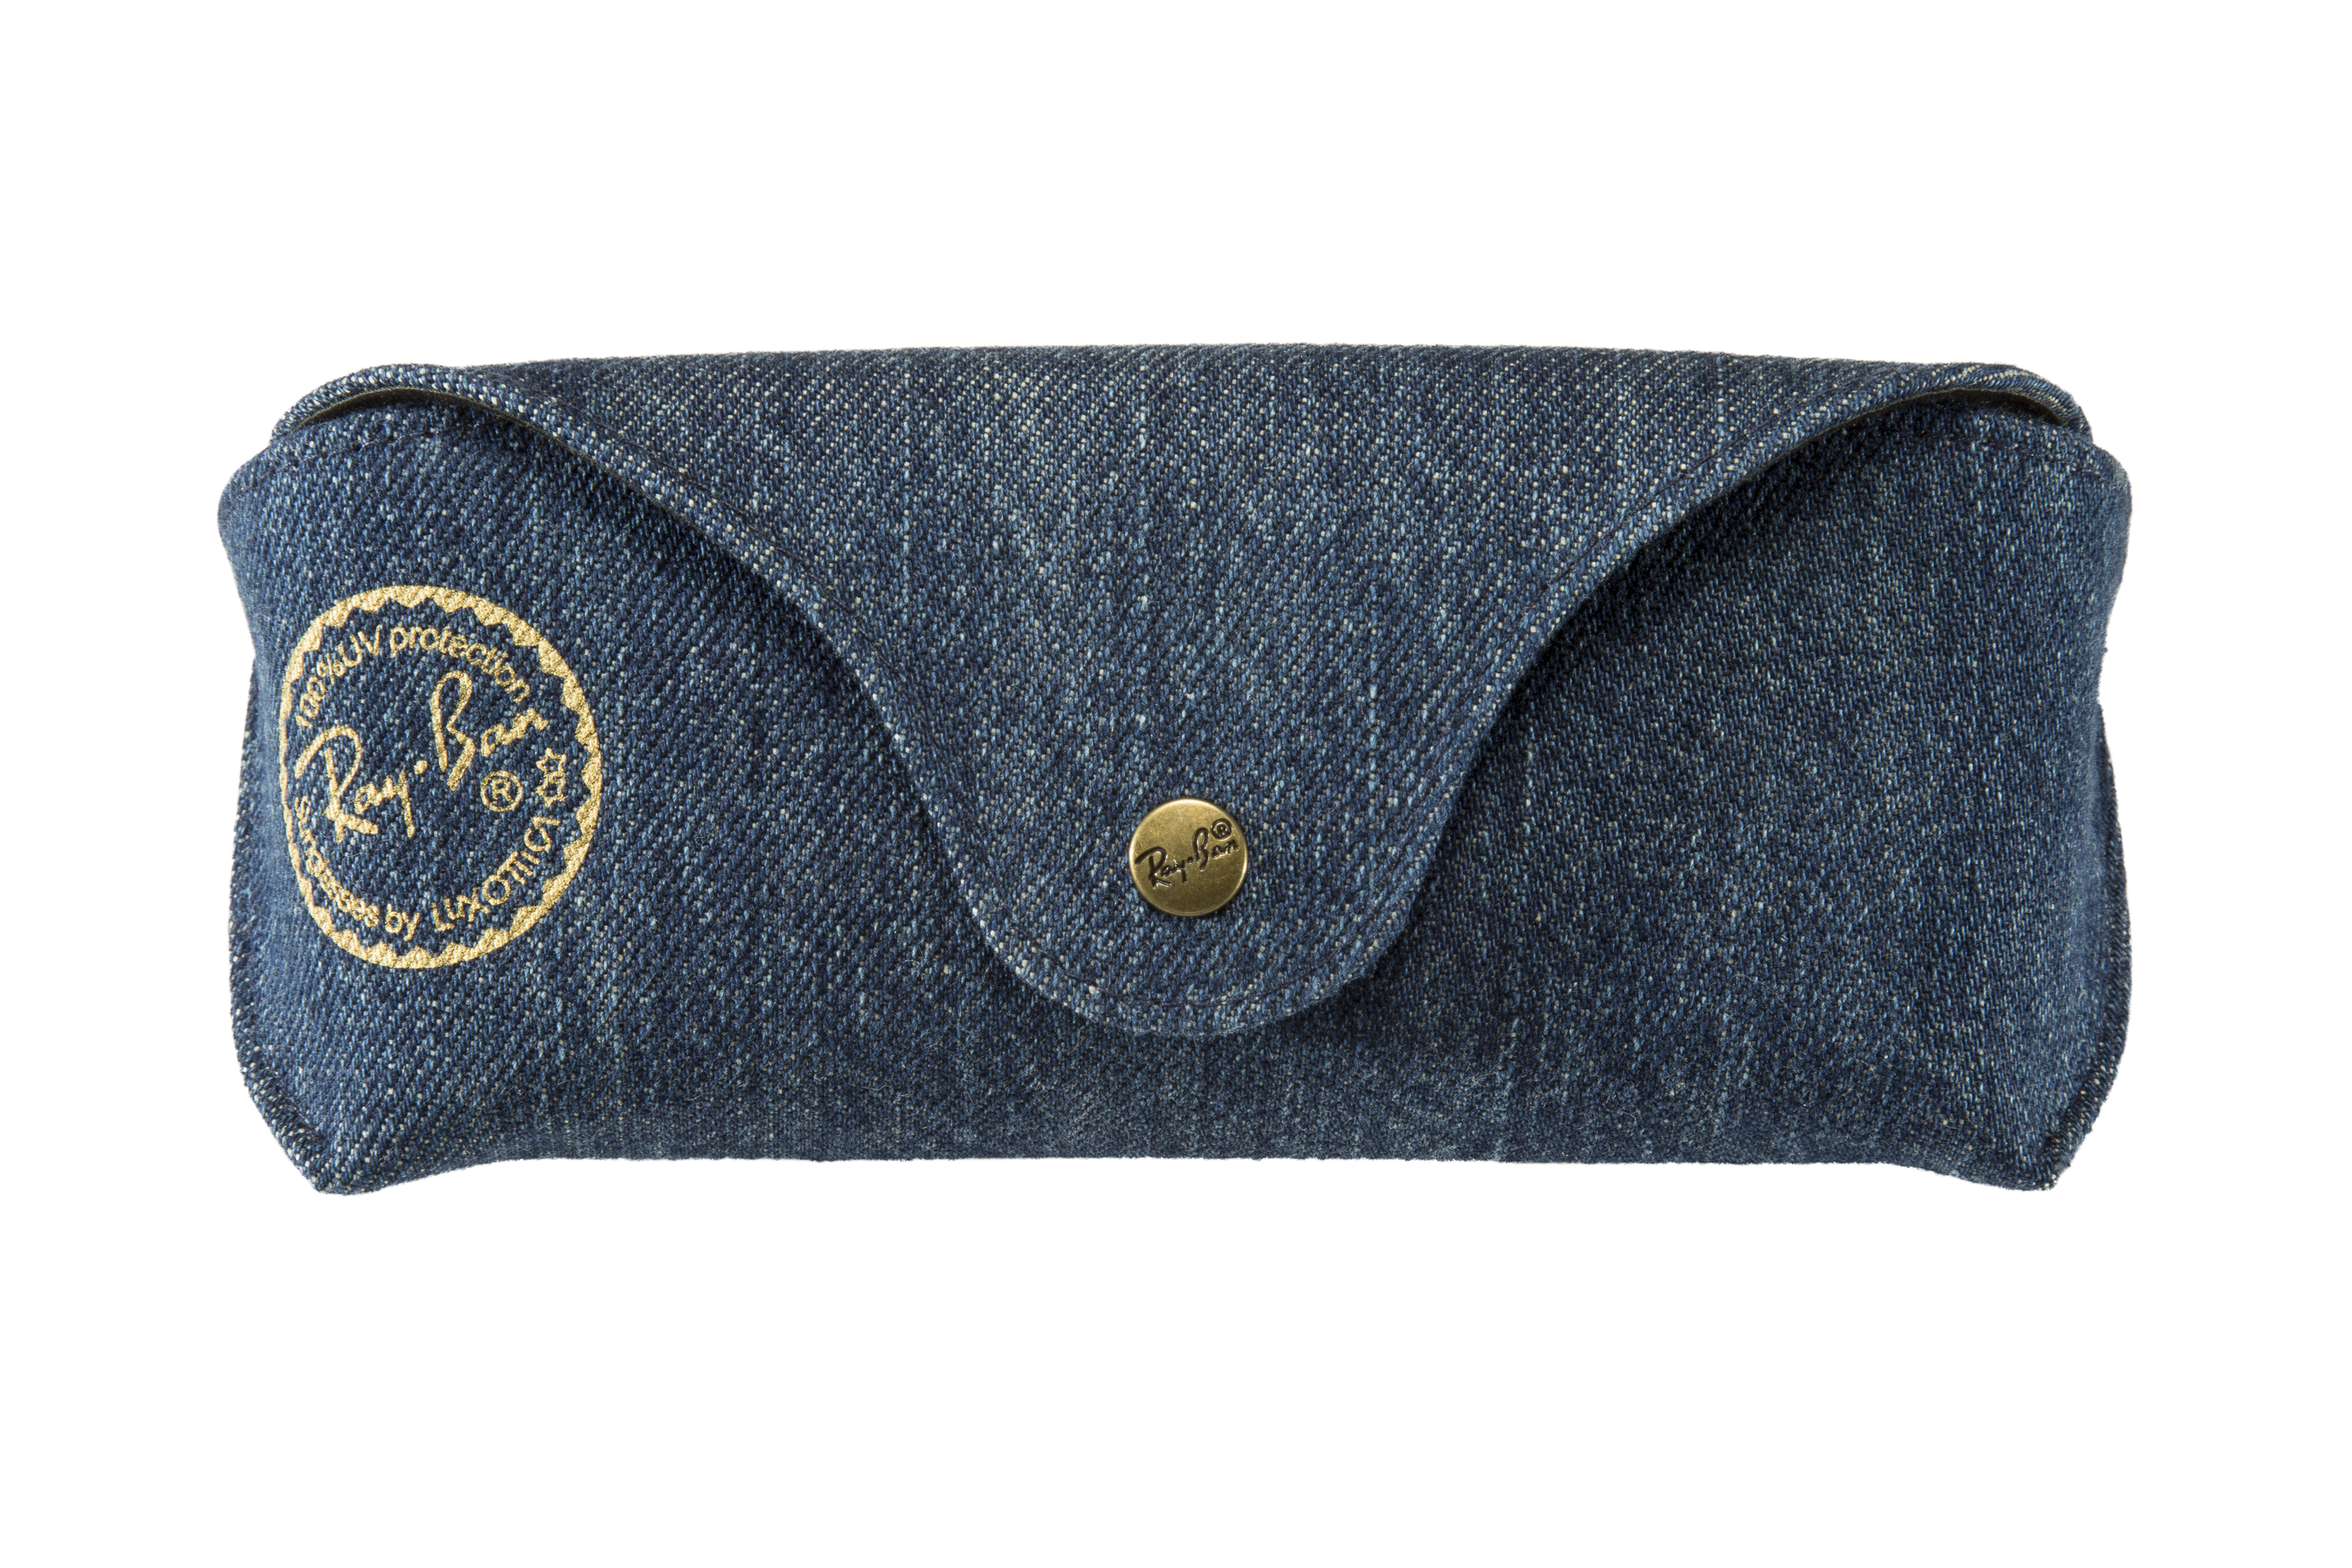 Ray-Ban SPECIAL EDITION DENIM CASE Blue 